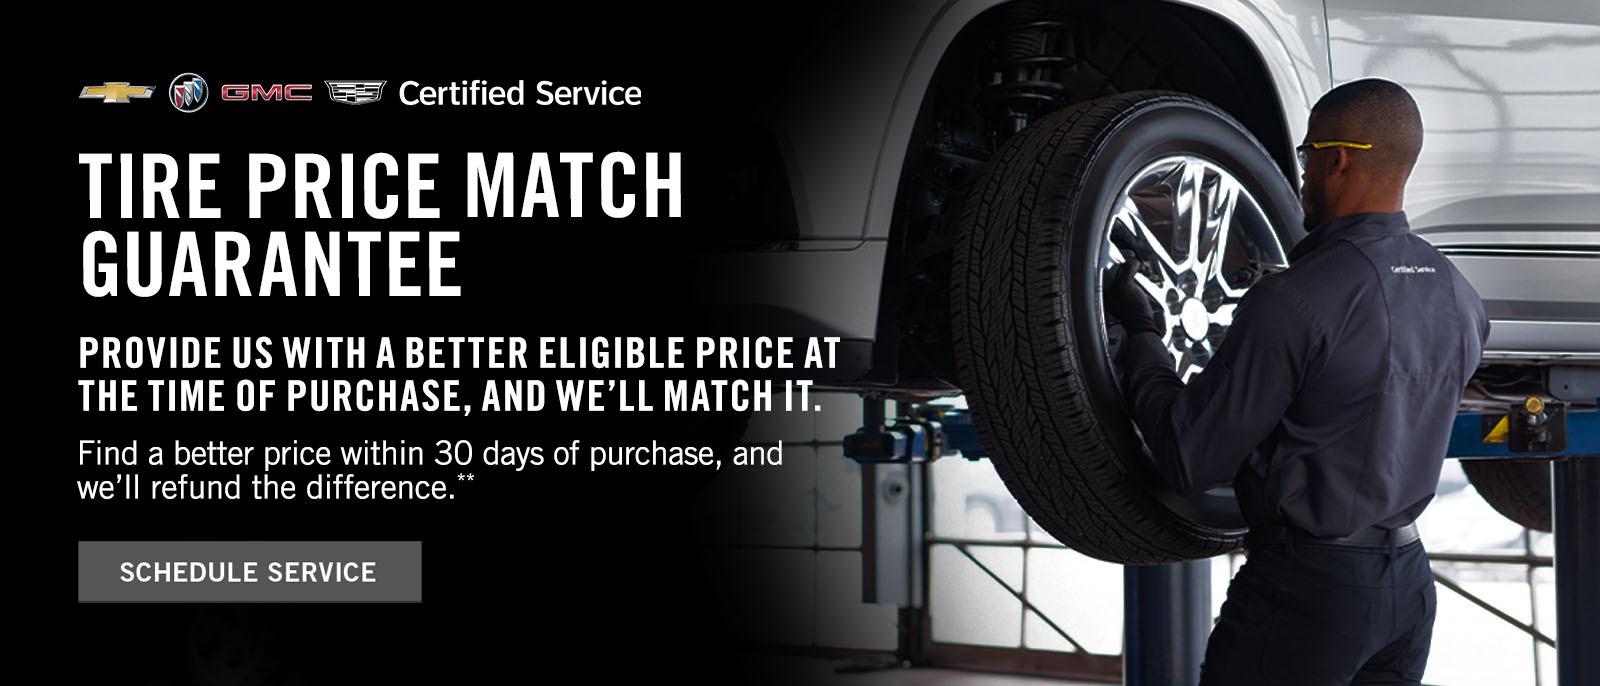 Provide us with a better price at the time of purchase, and we'll match it on select tire brands. Find a better price within 30 days of the purchase, and we'll refund the difference.